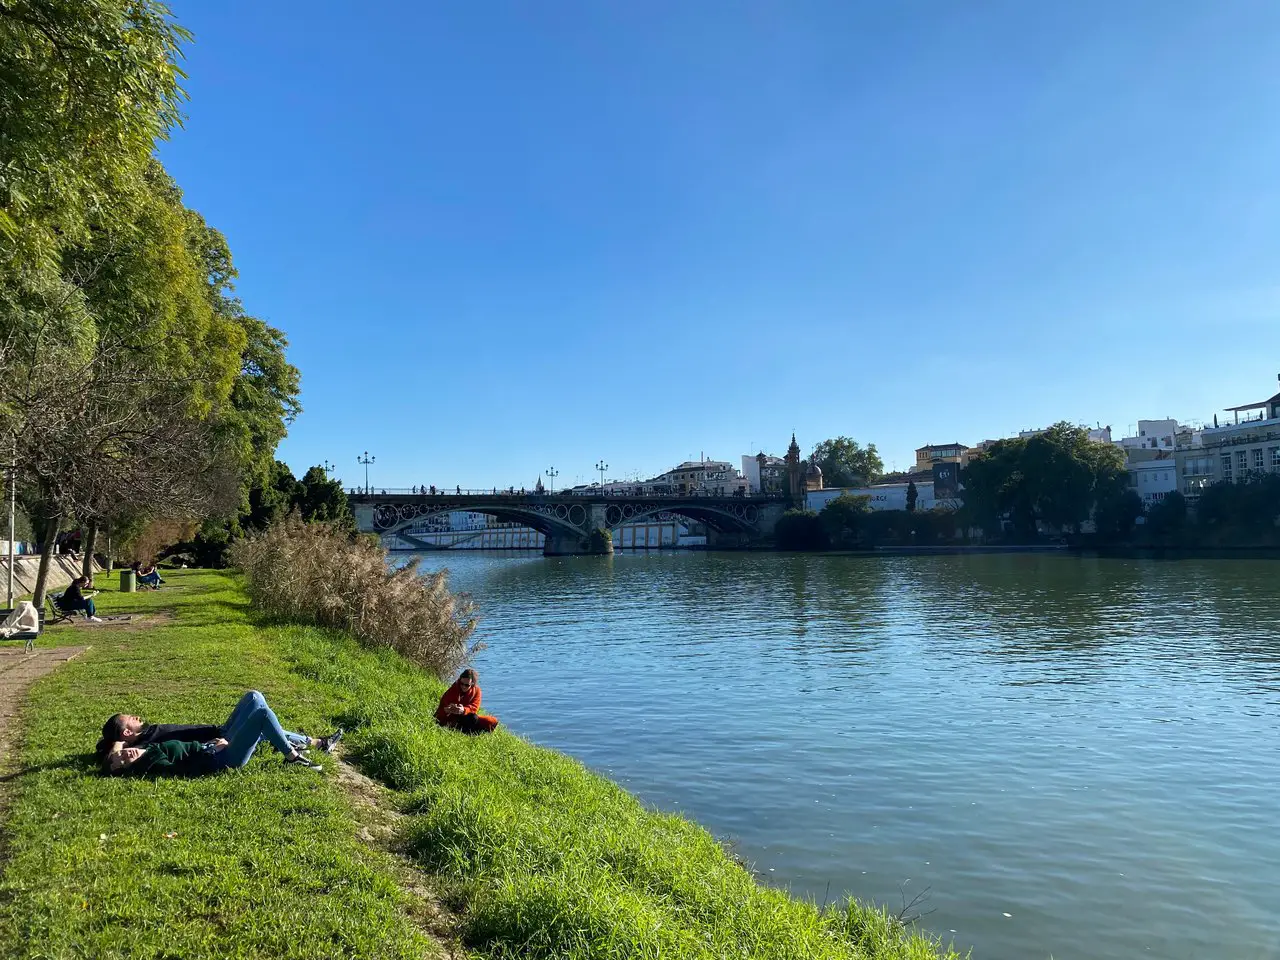 People sunbathing on the banks of the Seville river.